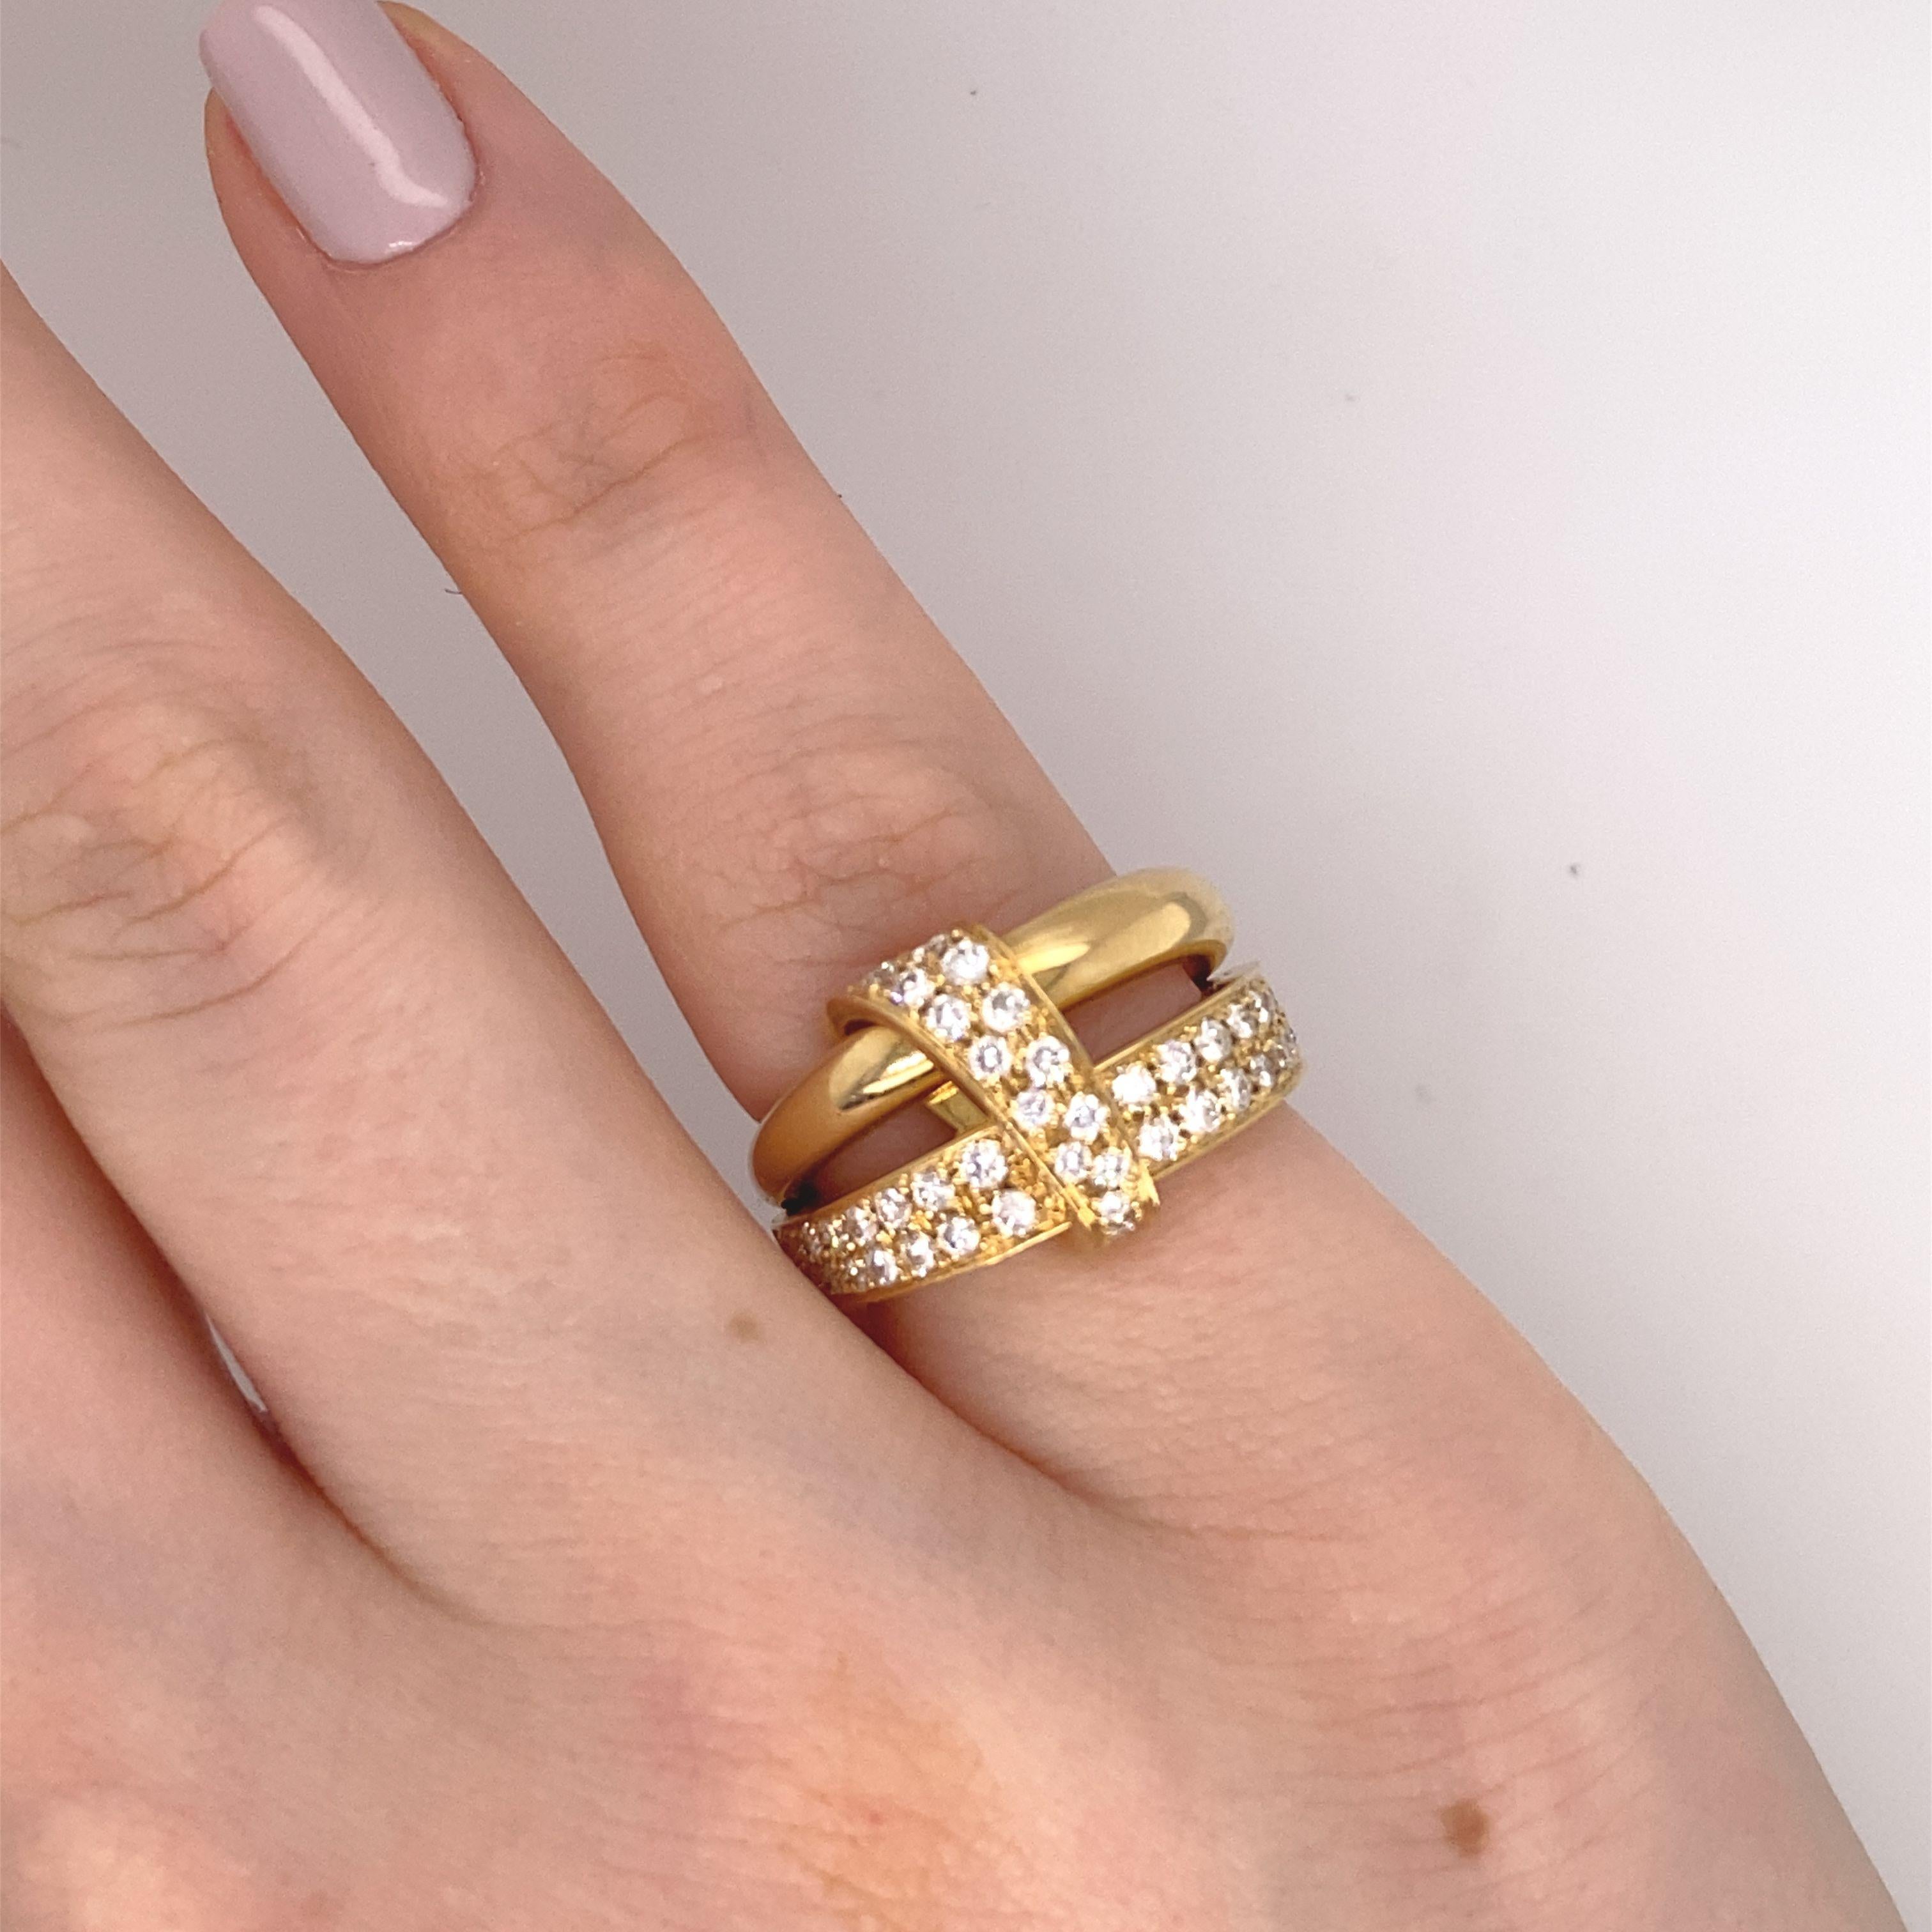 Modern Asprey Dimond 2-Band Ring, Set With 0.65ct Diamonds In 18ct Yellow Gold